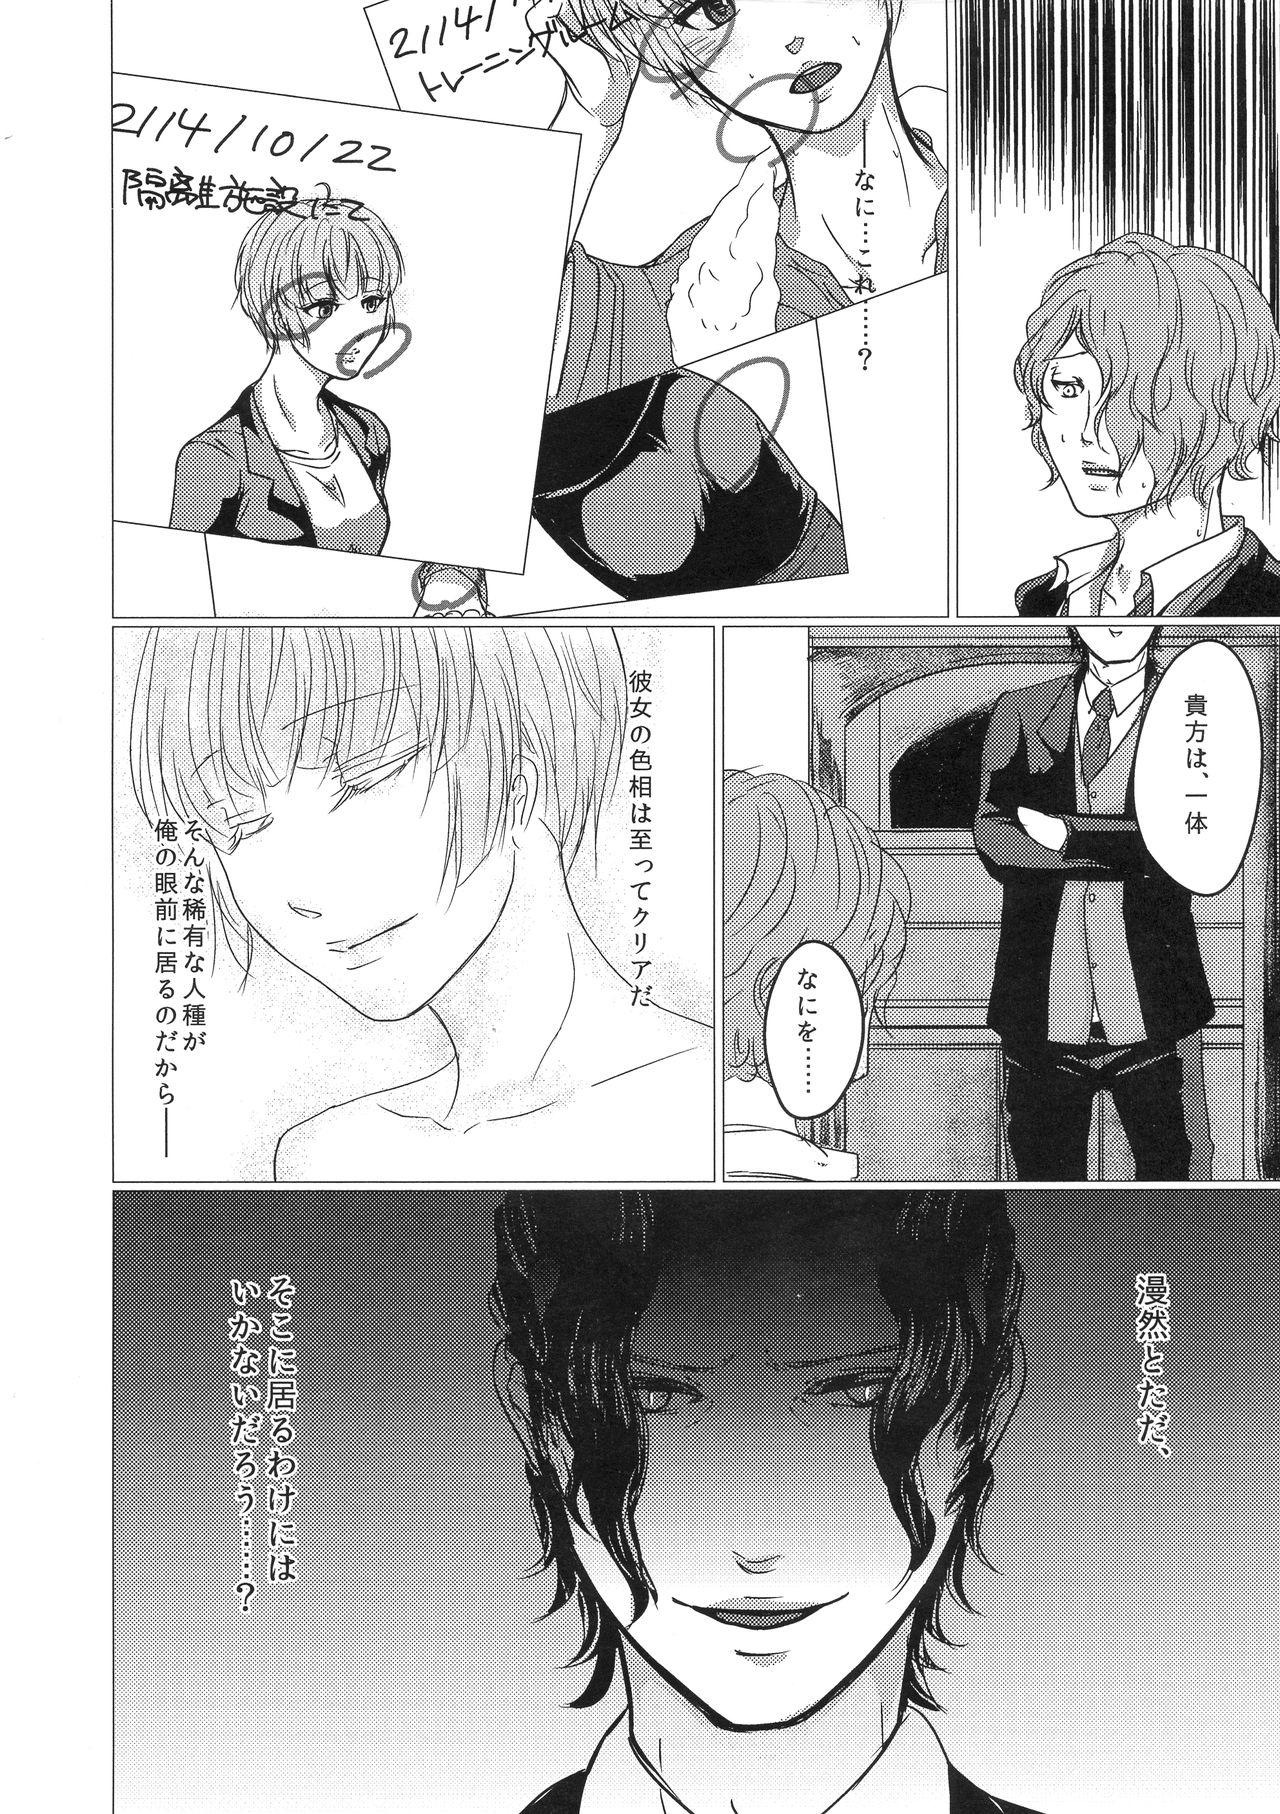 Titten I/O - Psycho-pass Colombia - Page 10